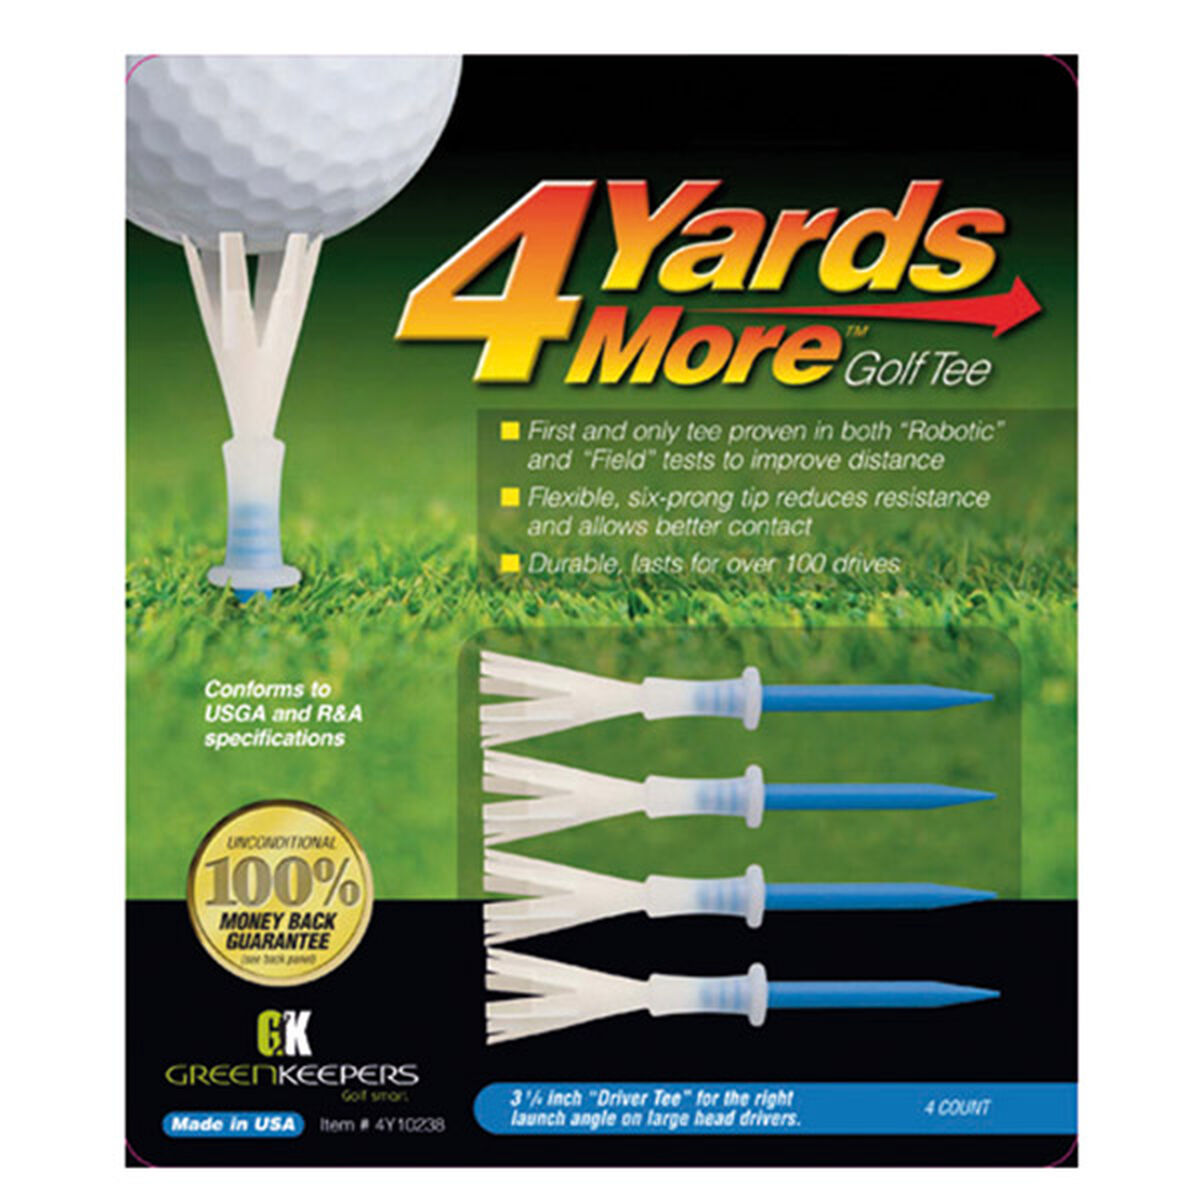 4 Yards More Blue Pack of 4 Golf Driver Golf Tees, Size: 3 1/4", 3 1/4 inches | American Golf